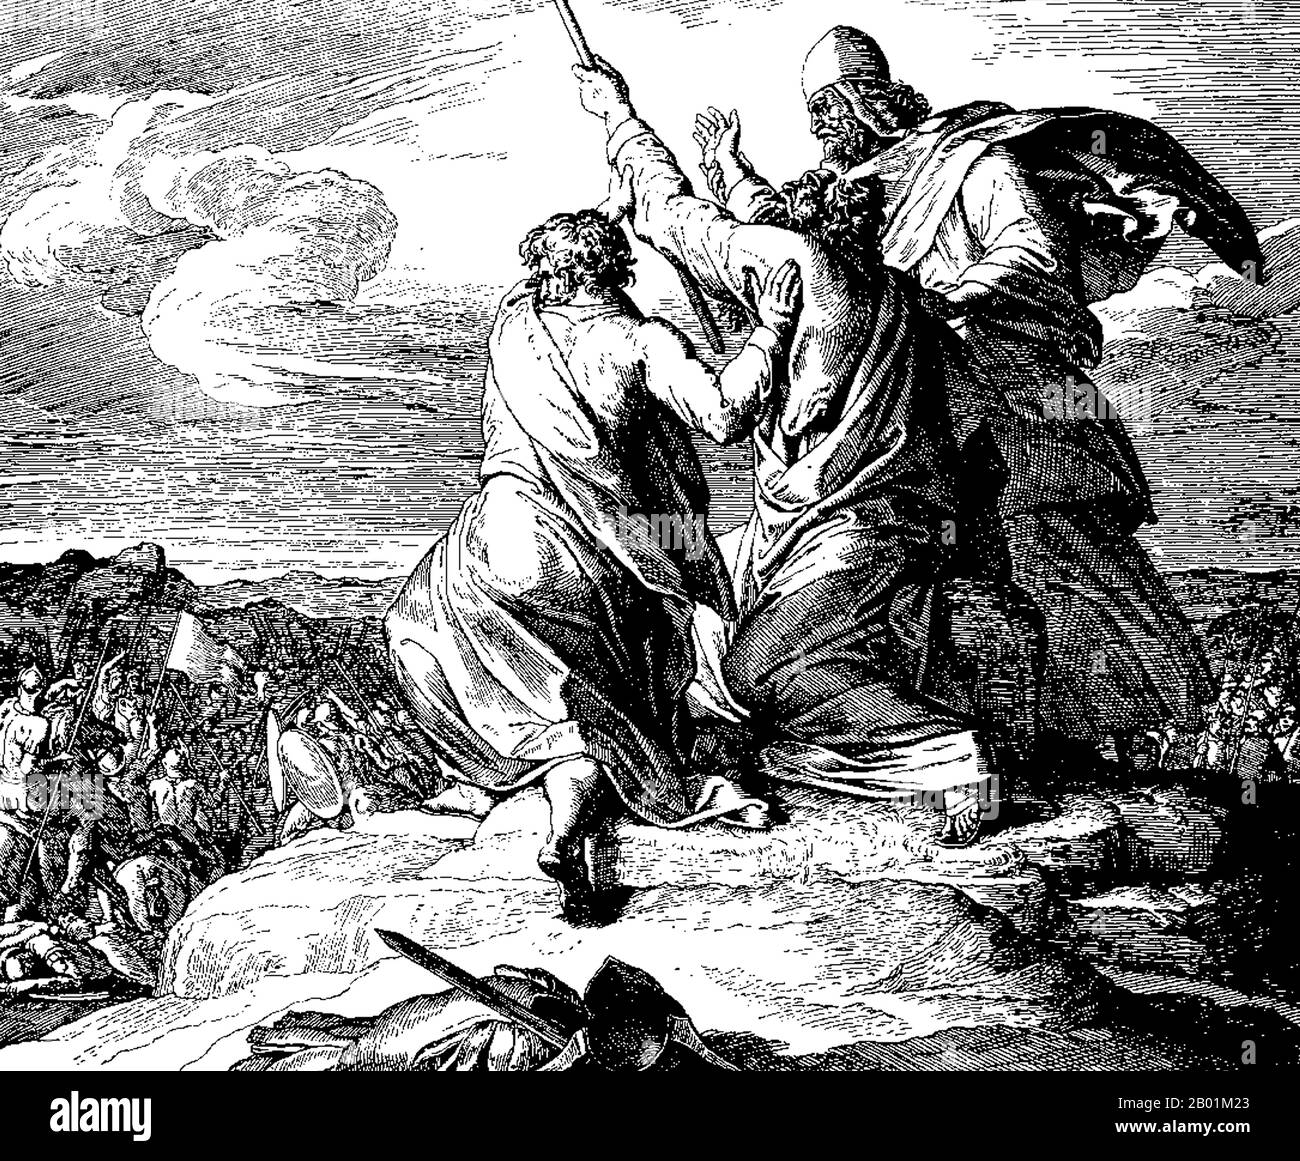 Germany: 'Battle with the Amalekites'. Moses holding up his arms during battle, assisted by Aaron and Hur. Woodcut illustration by Julius Schnorr von Carolsfeld (26 March 1794 - 24 May 1872) for 'Die Bibel in Bildern', c. 1860.  Moses was, according to the Hebrew Bible and Qur'an, a religious leader, lawgiver and prophet, to whom the authorship of the Torah is traditionally attributed. He is the most important prophet in Judaism, and is also considered an important prophet in Christianity and Islam, as well as a number of other faiths. Stock Photo